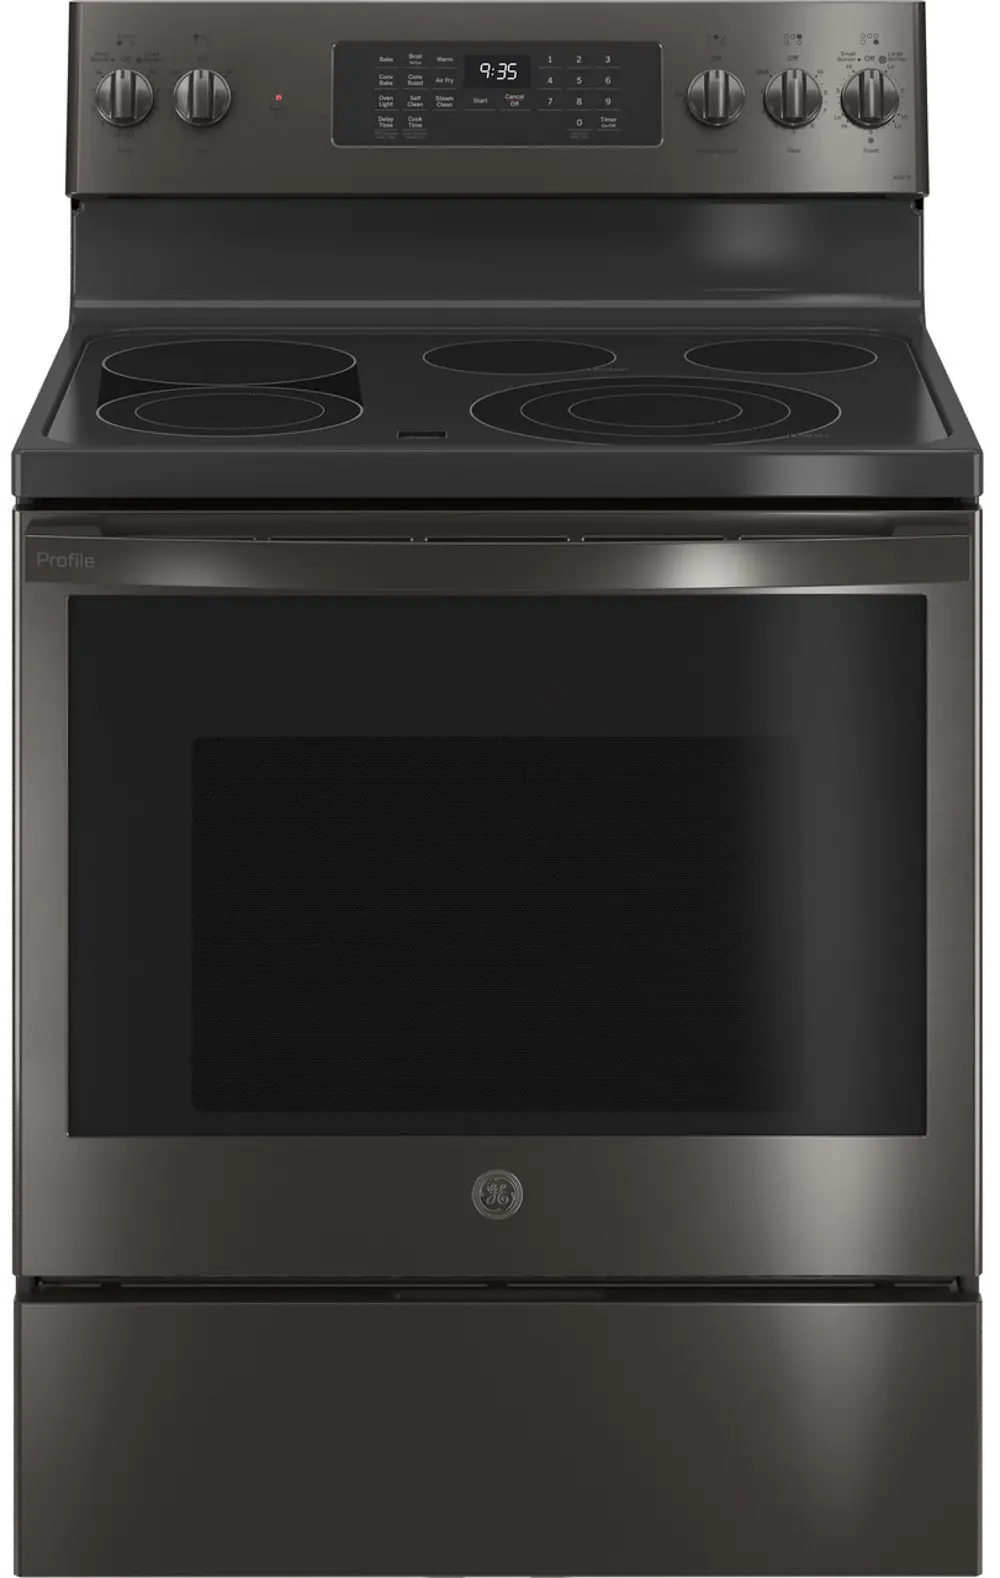 PB935BPTS GE Profile Smart Electric Range with Convection Oven and Air Fry - 30 Inch, 5.3 cu. ft. Black Steel-1